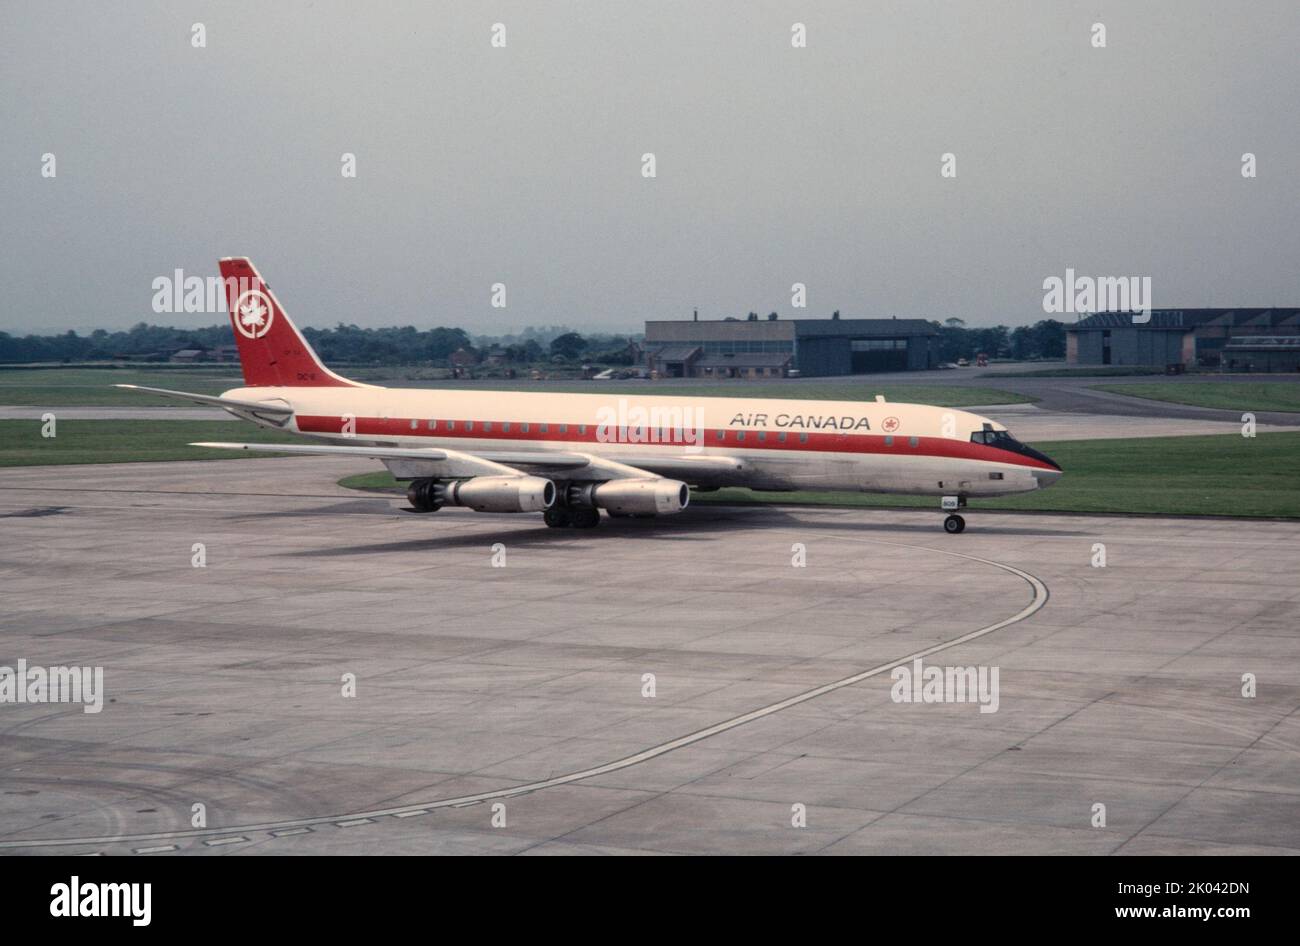 A Douglas DC-8 of Air Canada, serial number CF-TJI, at Manchester Airport in England on 1st July 1965. Stock Photo